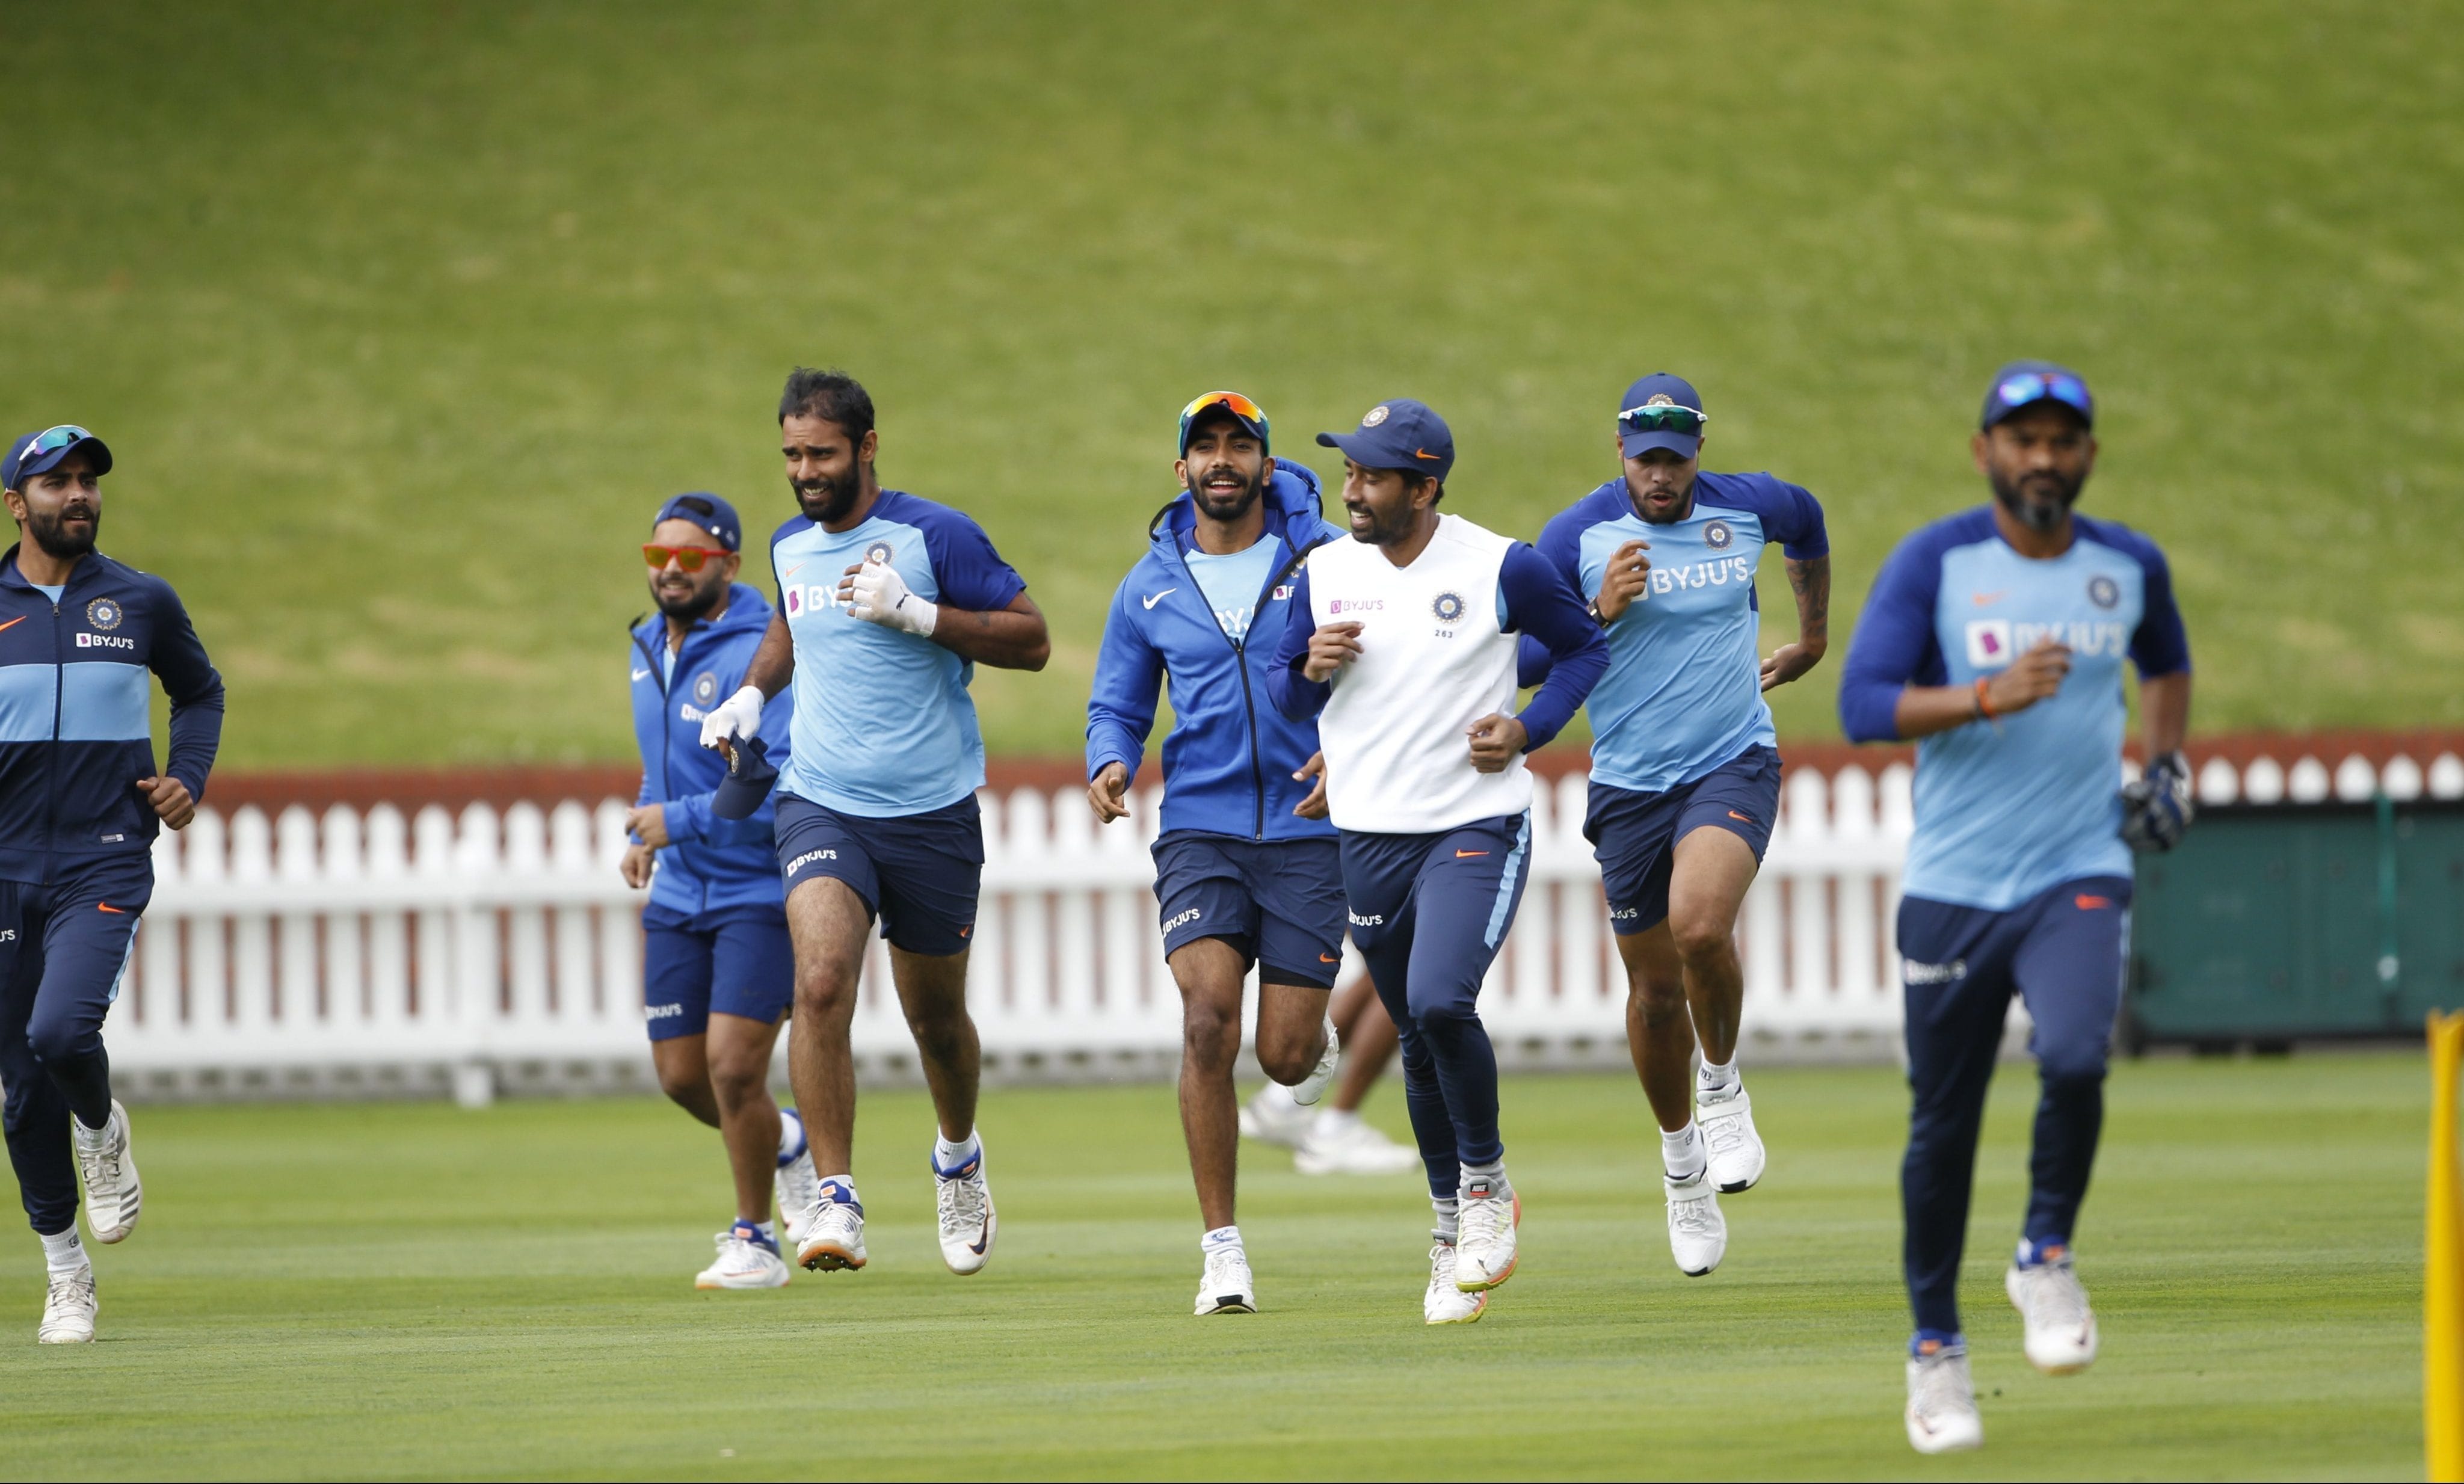 India and Kiwis to face crosswinds Test in series opener